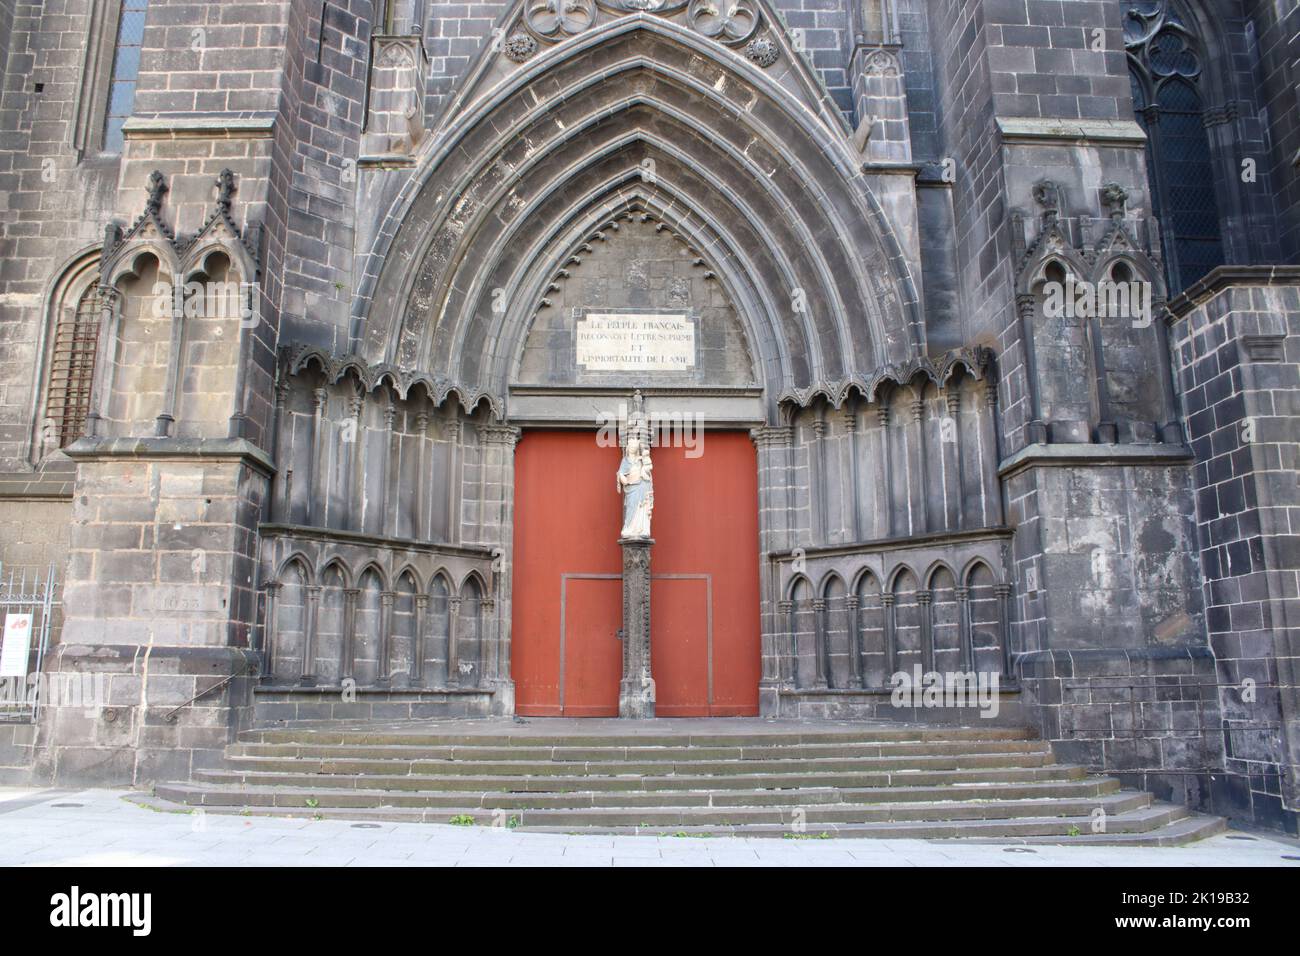 Beautiful entrance view of the gothic Cathedral of Our Lady of the Assumption located in the central french city of Clermont-Ferrand. Stock Photo